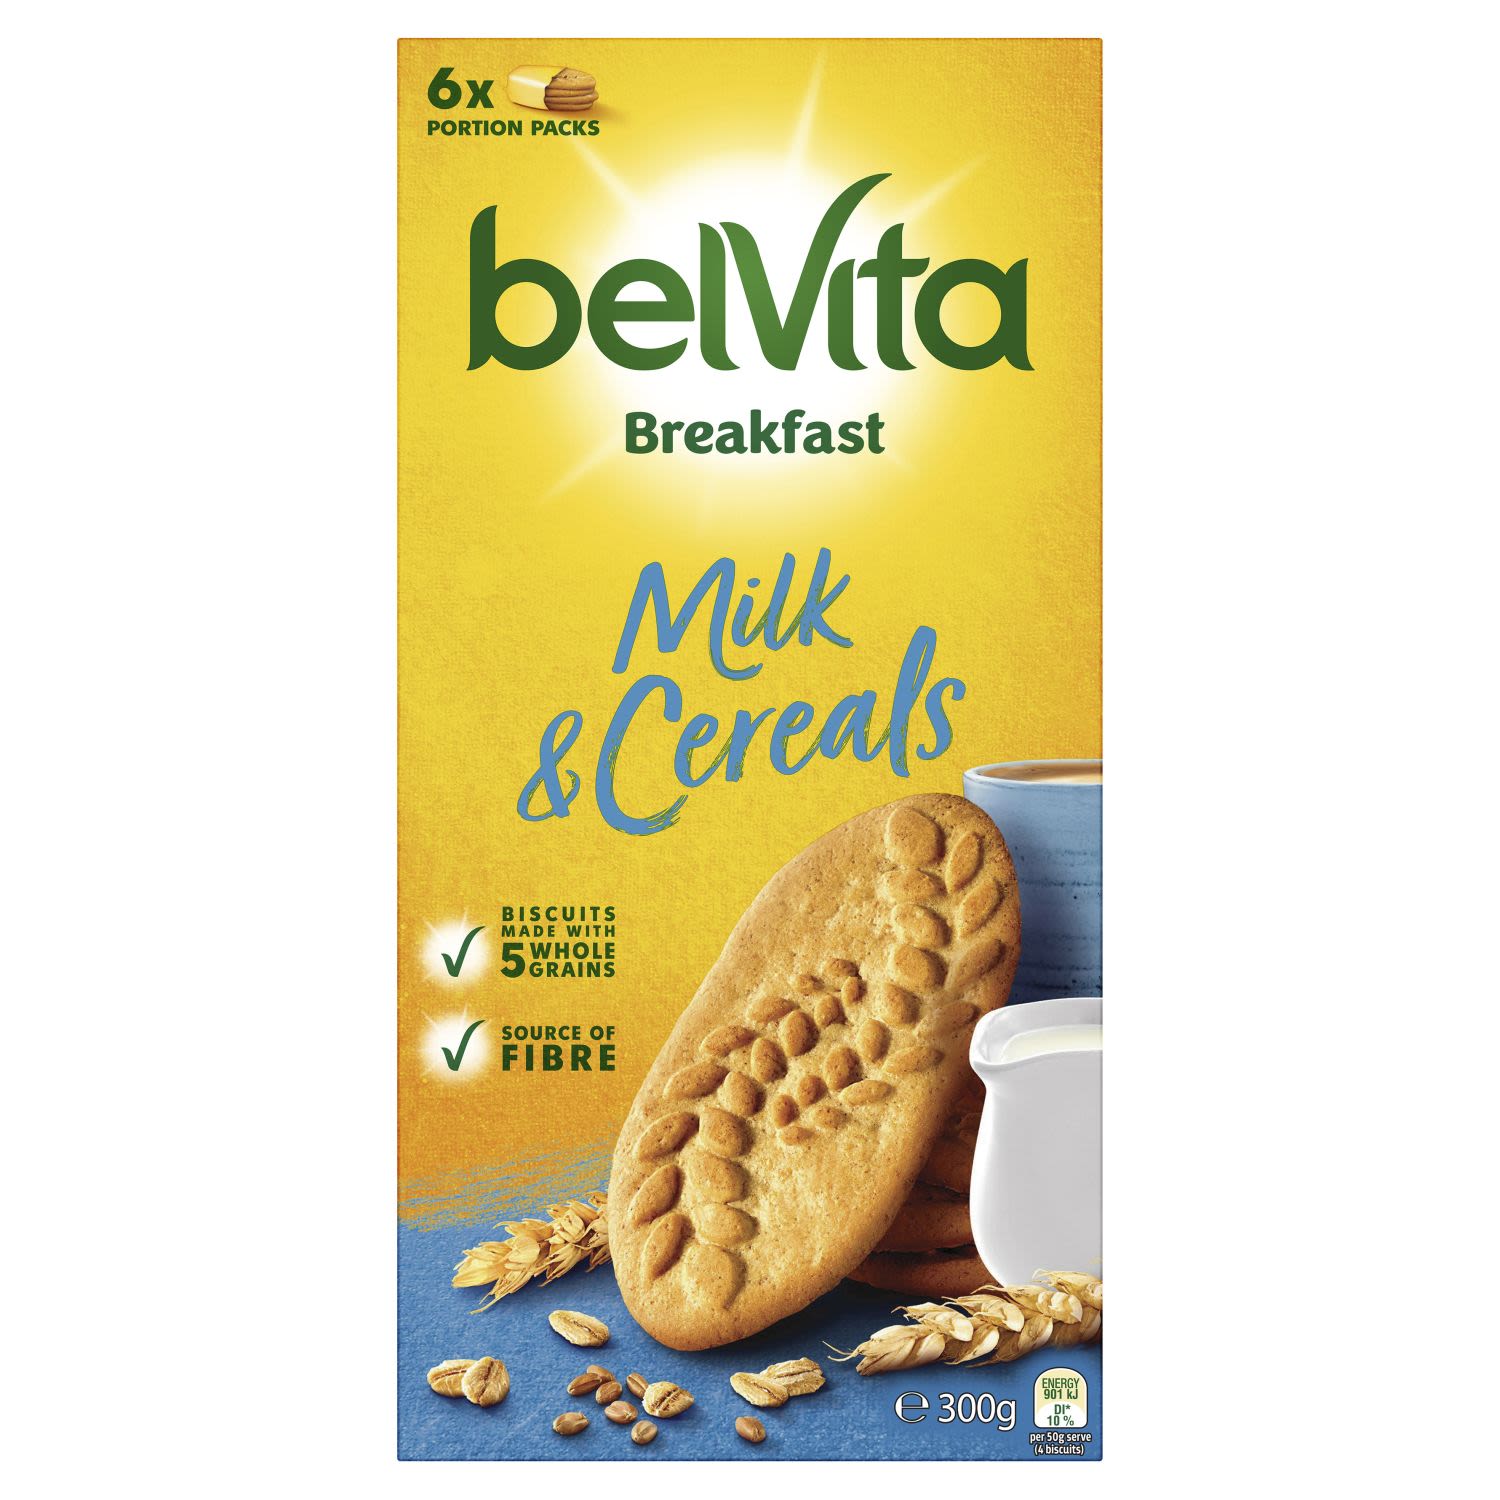 Brigthen your morning with...
belVita Breakfast

Enjoy the delicious and nutritious taste of 5 wholegrains in a wholesome biscuit.
Gently baked to perfection providing a source of fibre with no artificial colours or flavours.
The flavour you look forward to every morning, making them the feel-good, taste-good, start you're looking for enabling you to be the best you. Always. <br /> <br />